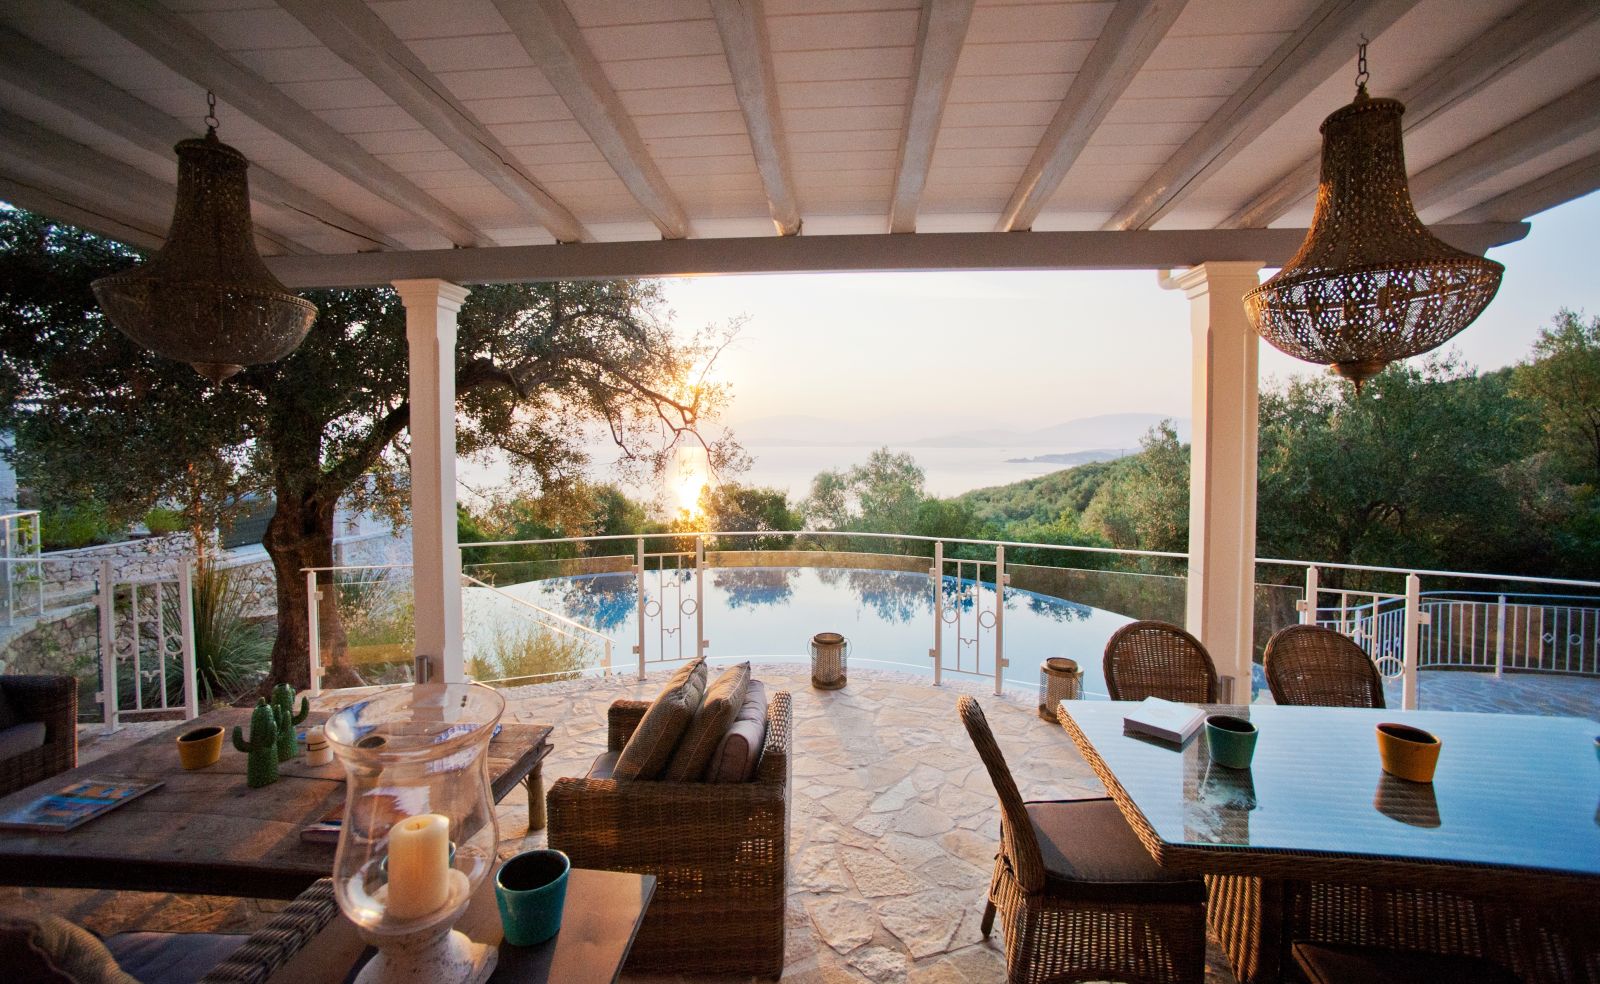 Covered outdoor terrace with two tables and chairs overlooking the pool at villa kalamaki in corfu, Greece